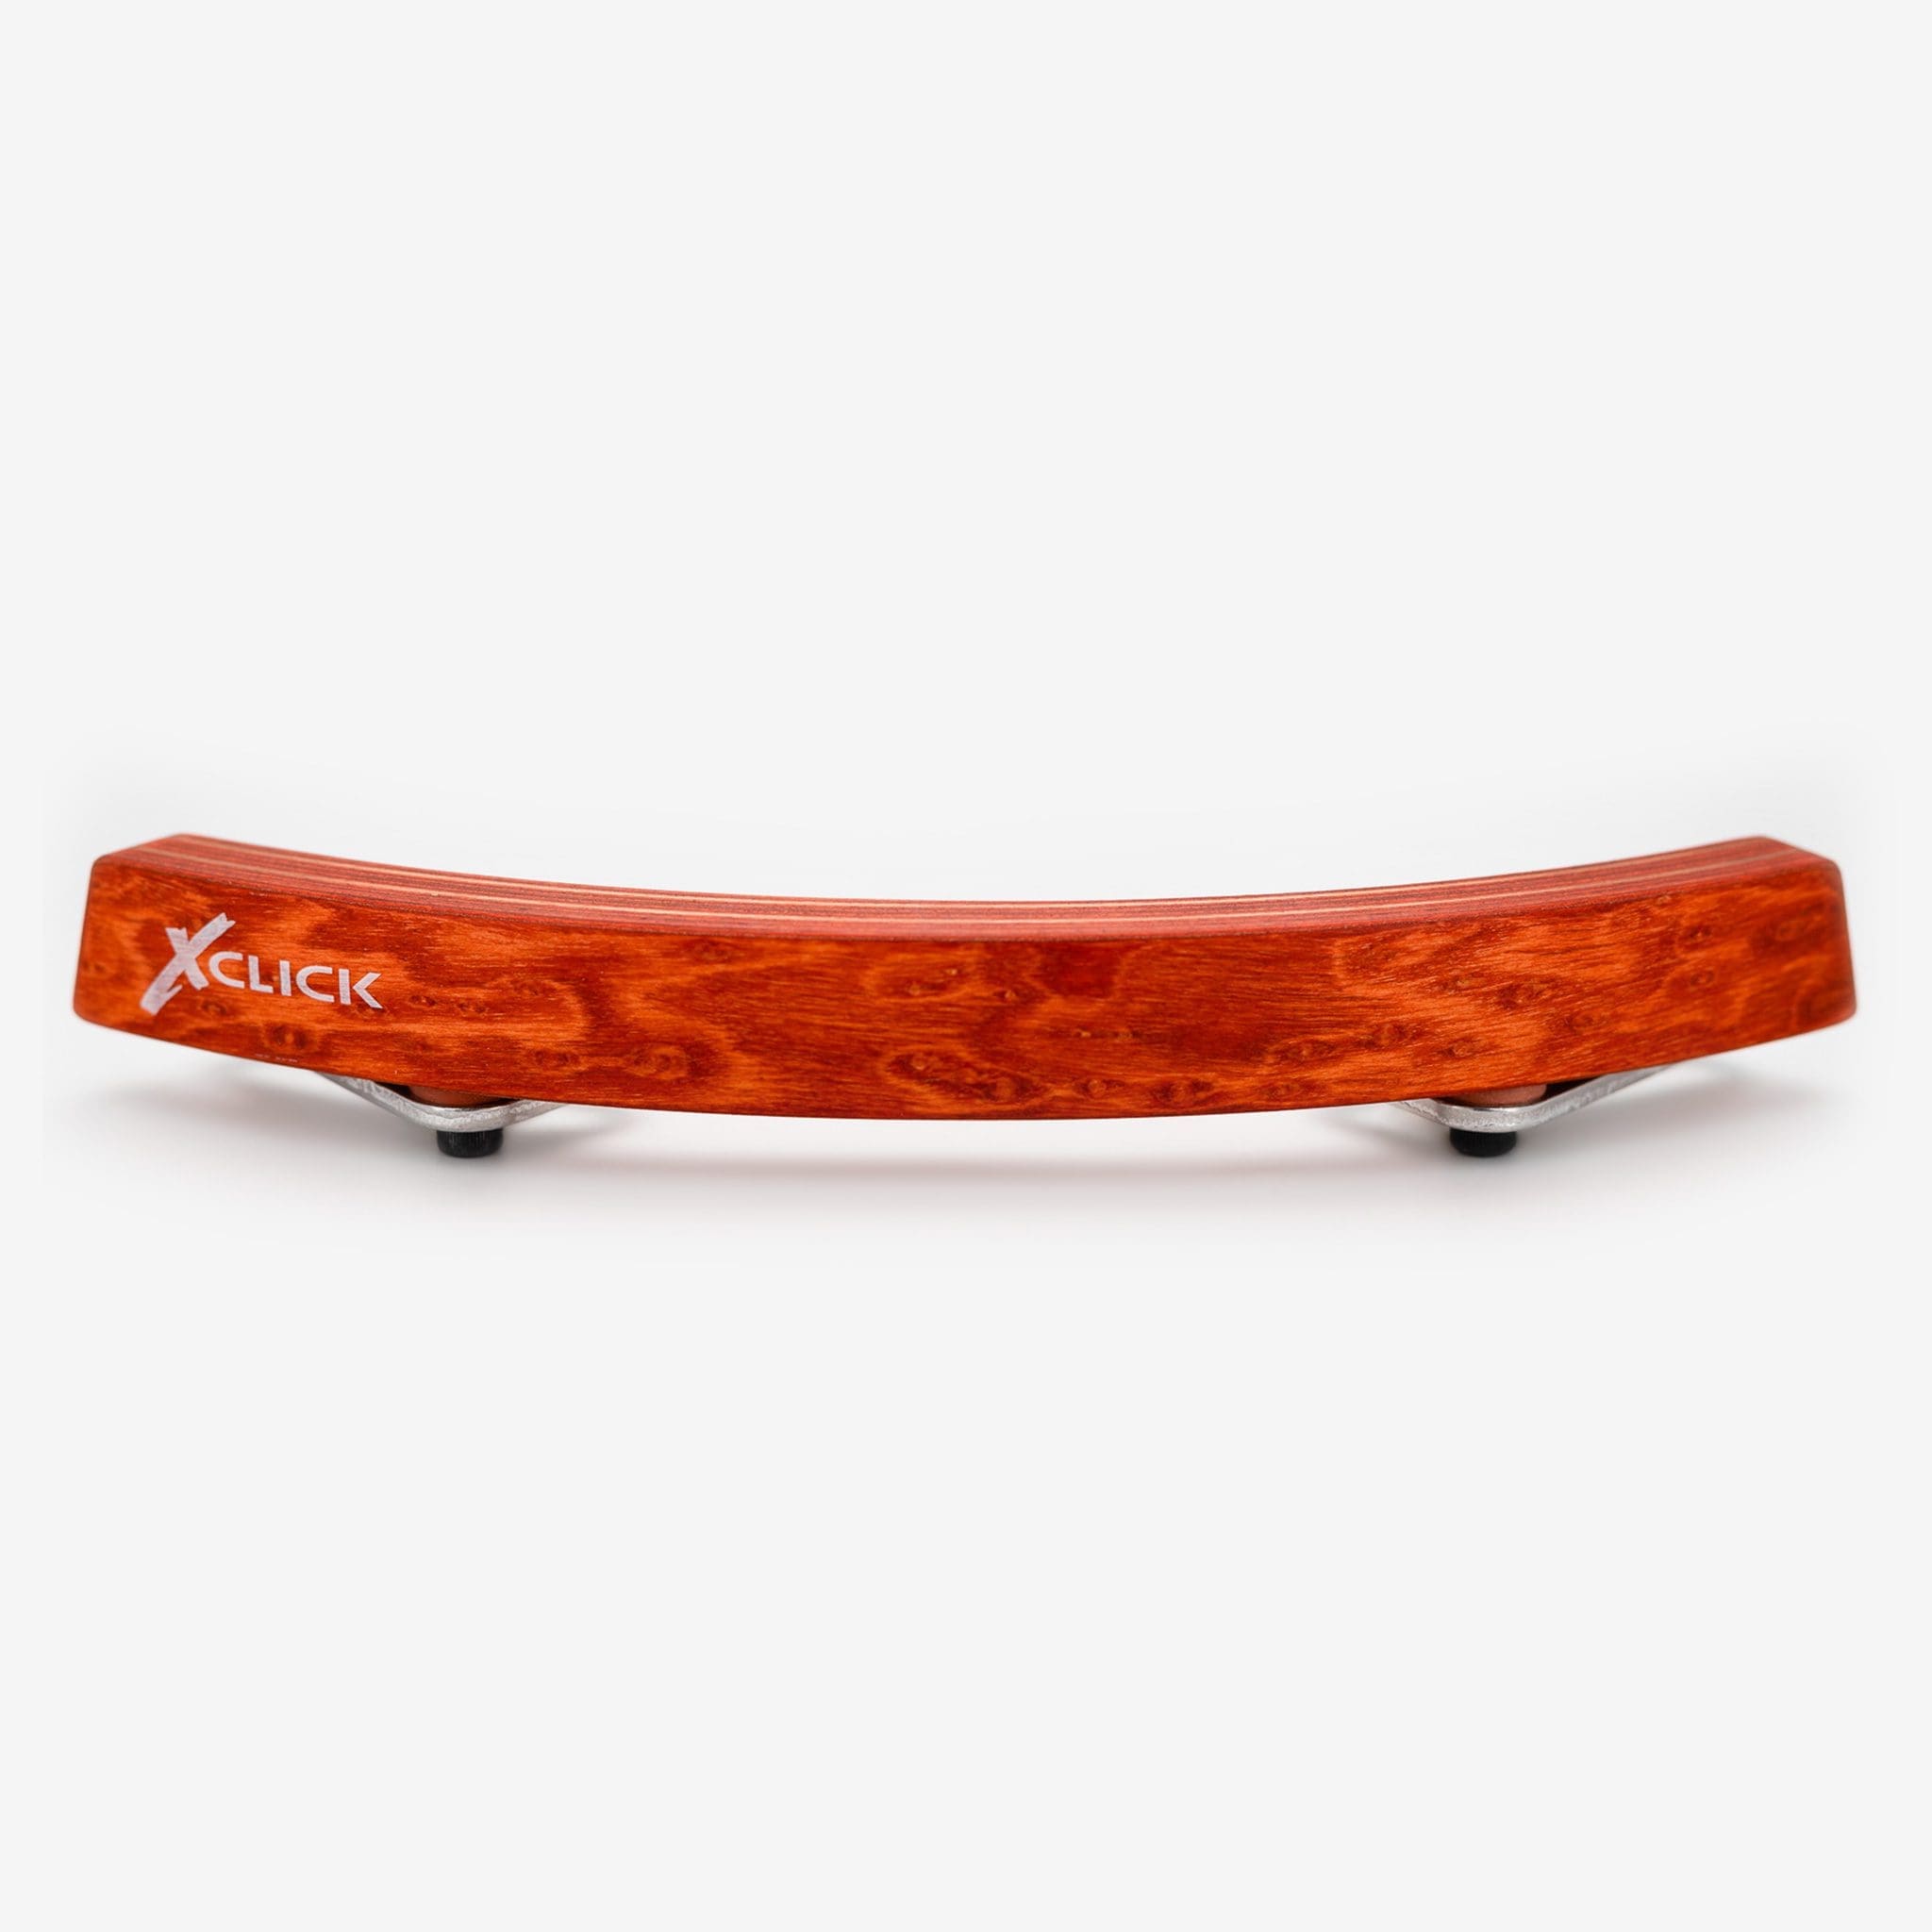 X-Click Limited Edition Flame Maple Cross-Stick Enhancer